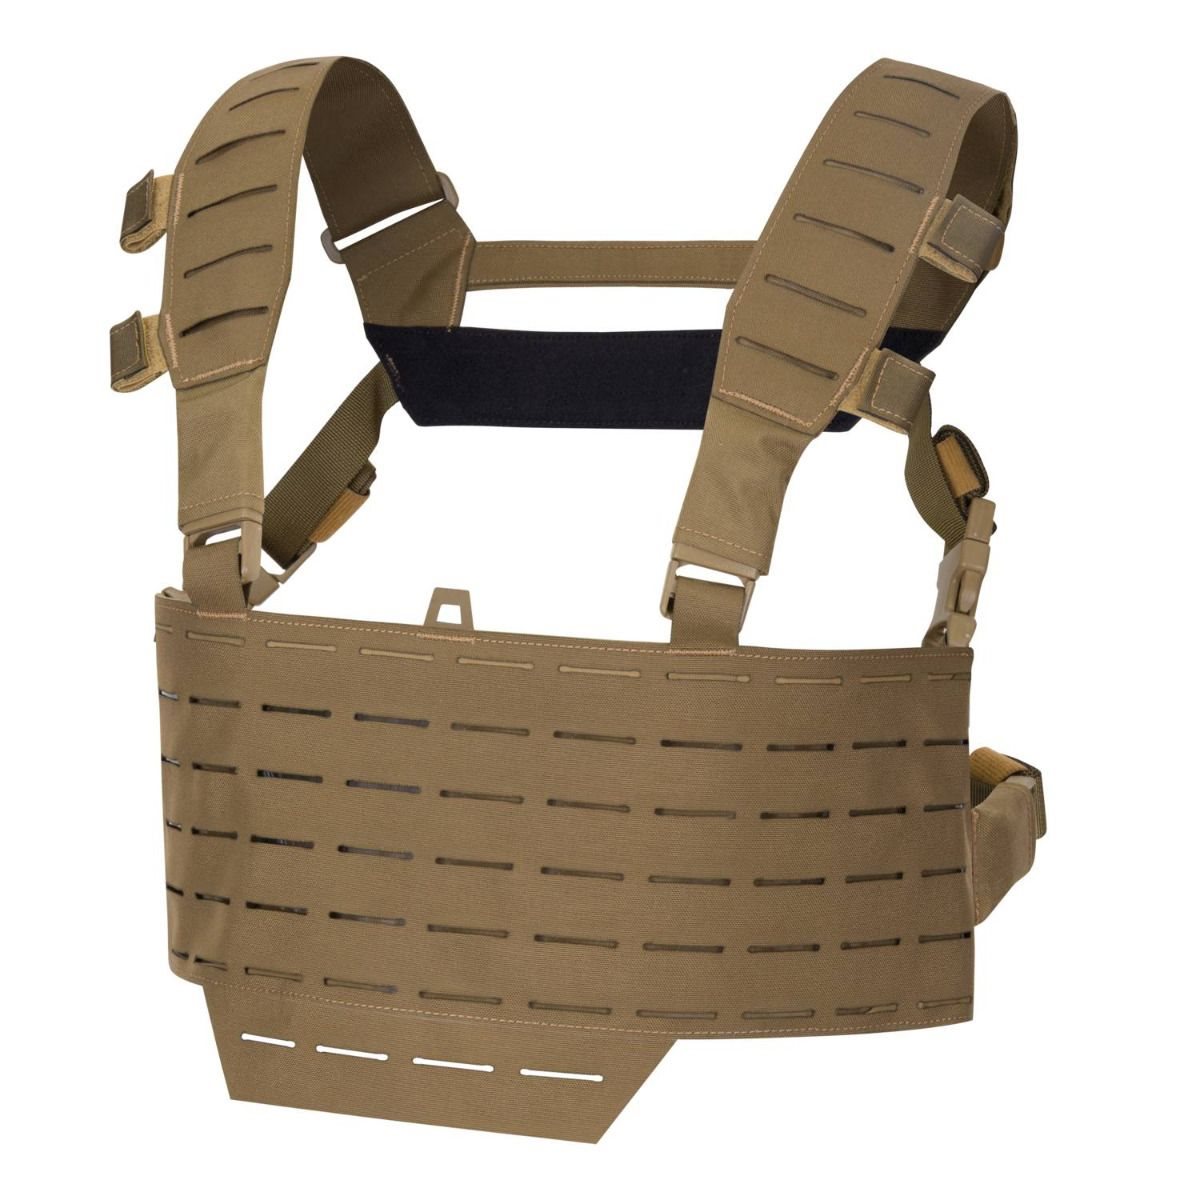 DIRECT ACTION WARWICK SLICK CHEST RIG COYOTE | Army surplus MILITARY RANGE